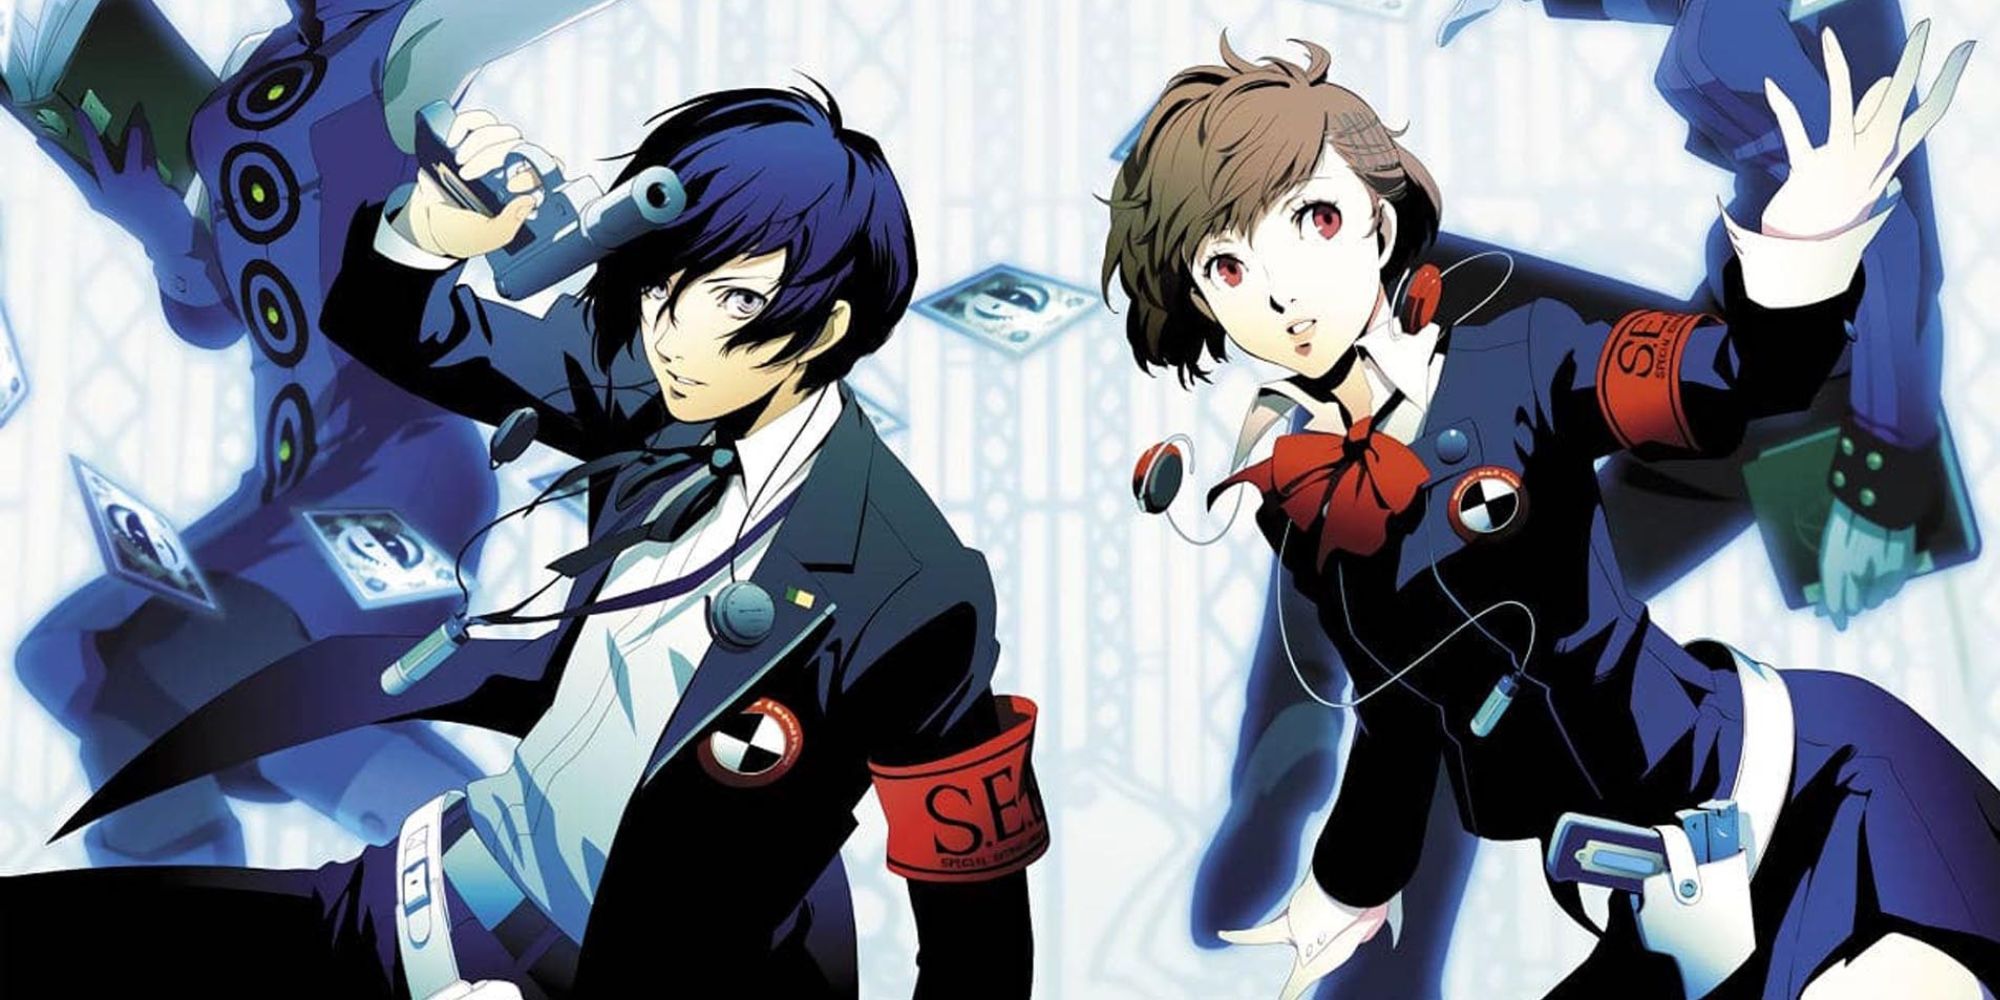 The male and female protagonists in Persona 3 Portable